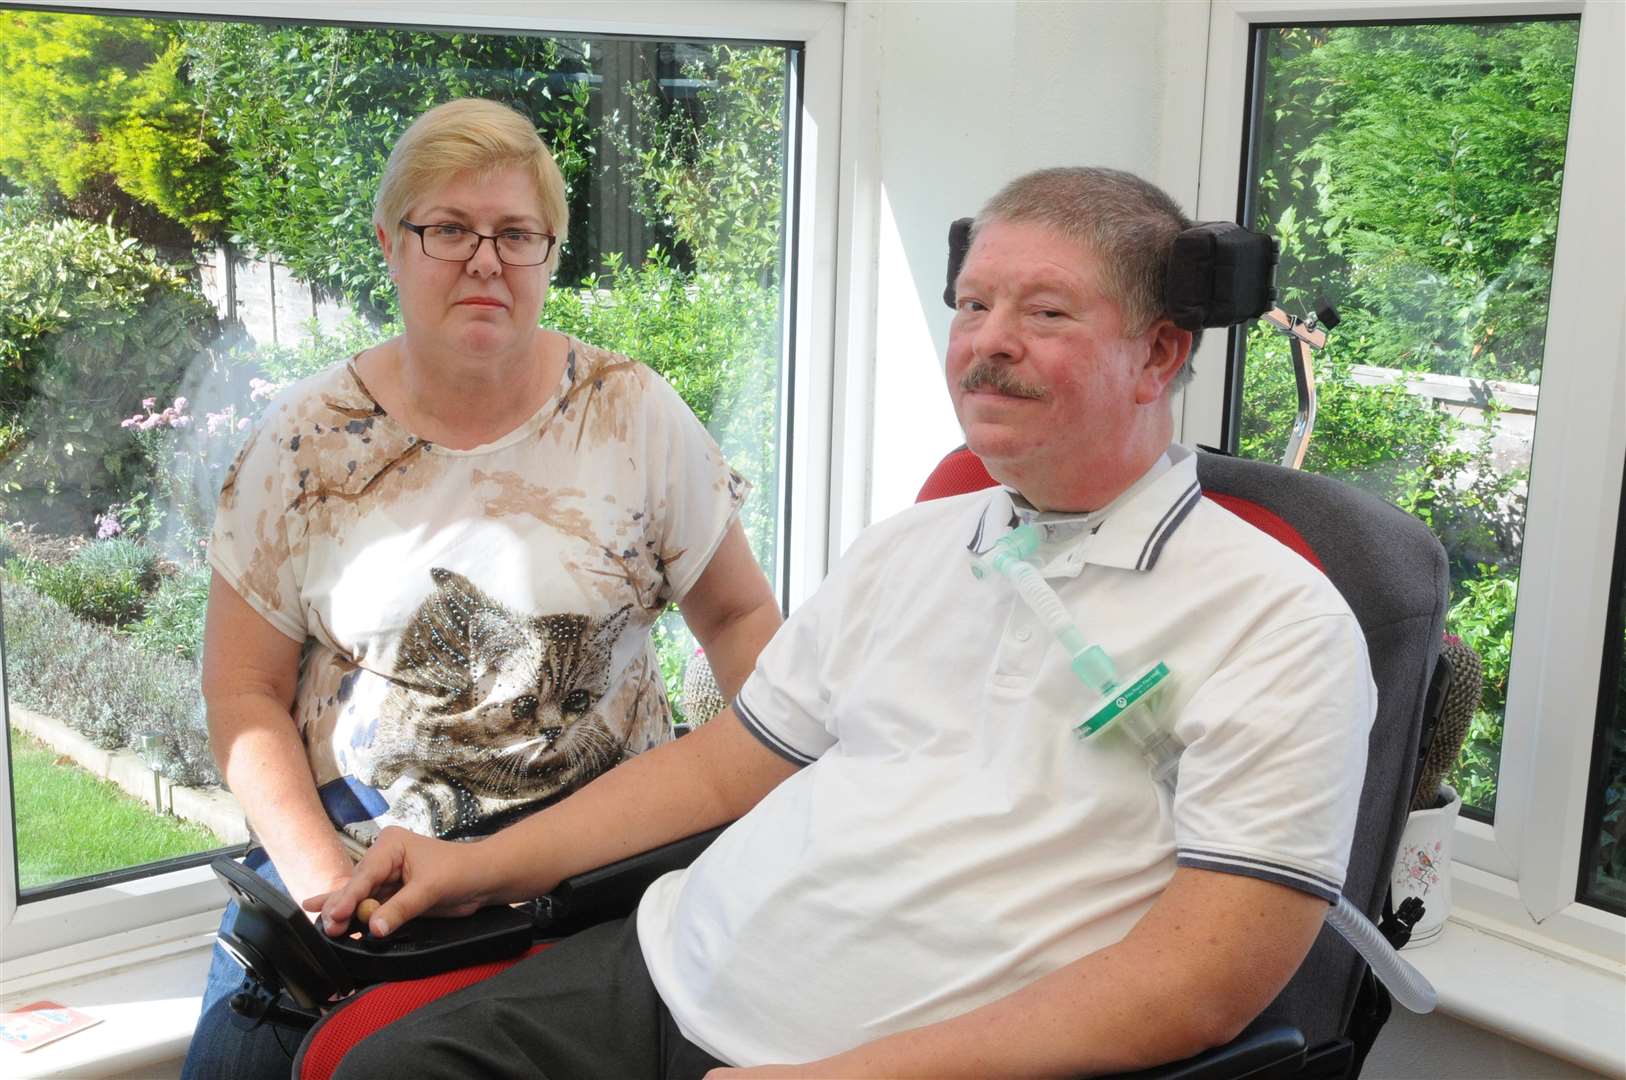 Sue and Mark Bishop who have had great difficulty getting his faulty wheelchair repaired over the past three months